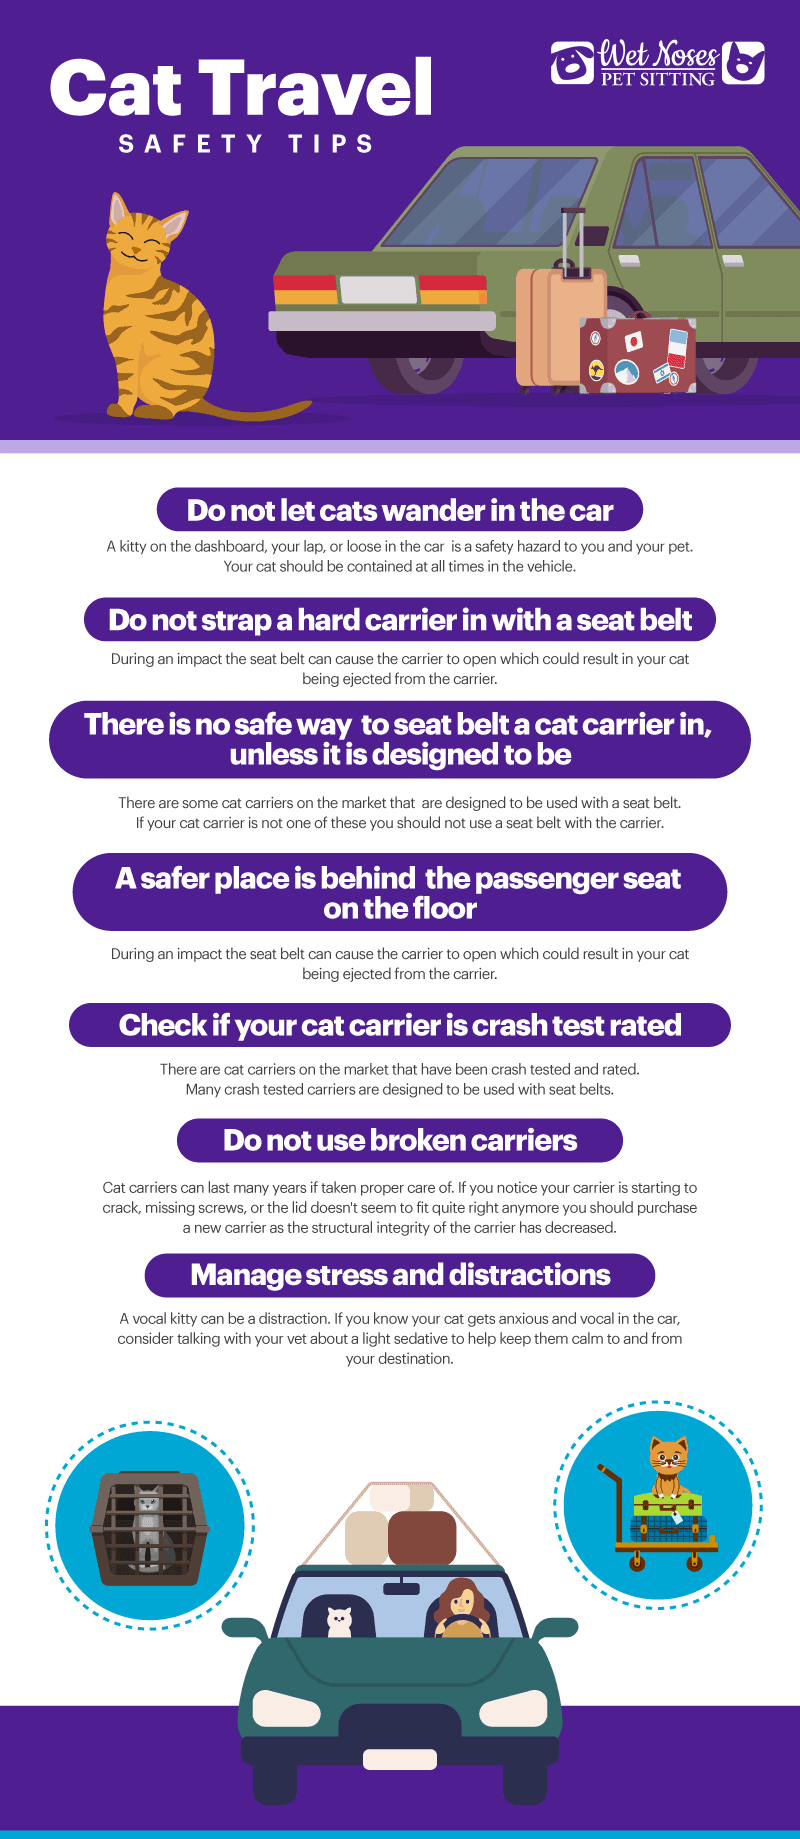 https://wetnosespetsitting.com/wp-content/uploads/2021/06/1000580_Cat-Travel-Safety-Tips-Infographic_031121.png